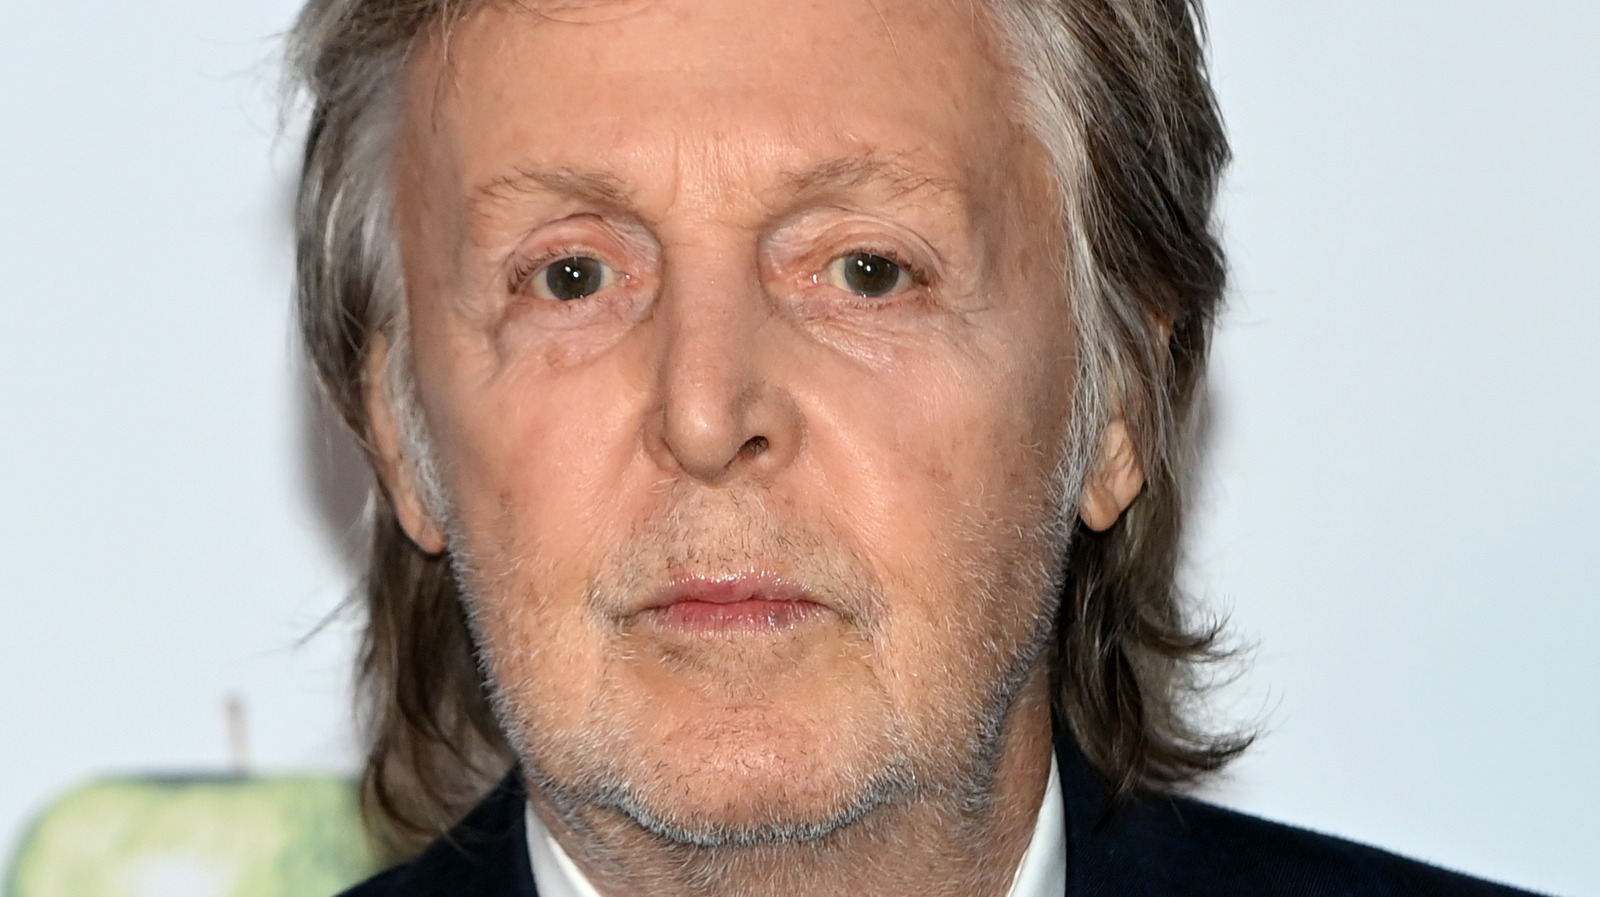 Paul McCartney’s son is essentially his twin